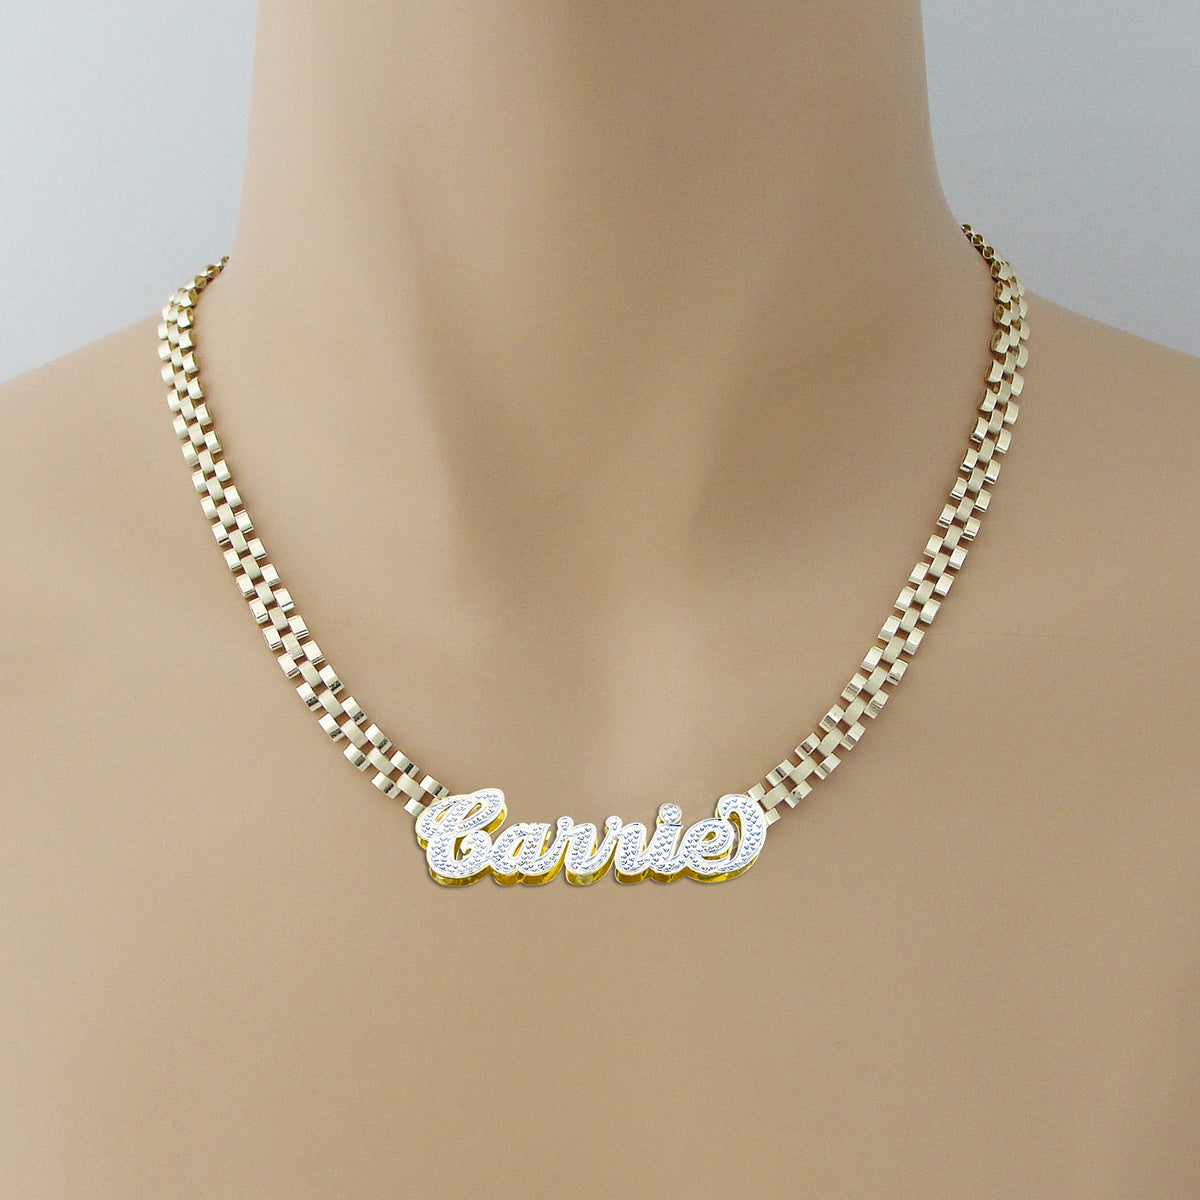 Real 10K Solid Gold Iced Out Personalized Name 6 mm Watch-Band Link Style Chain Hip Hop Fine Jewelry.